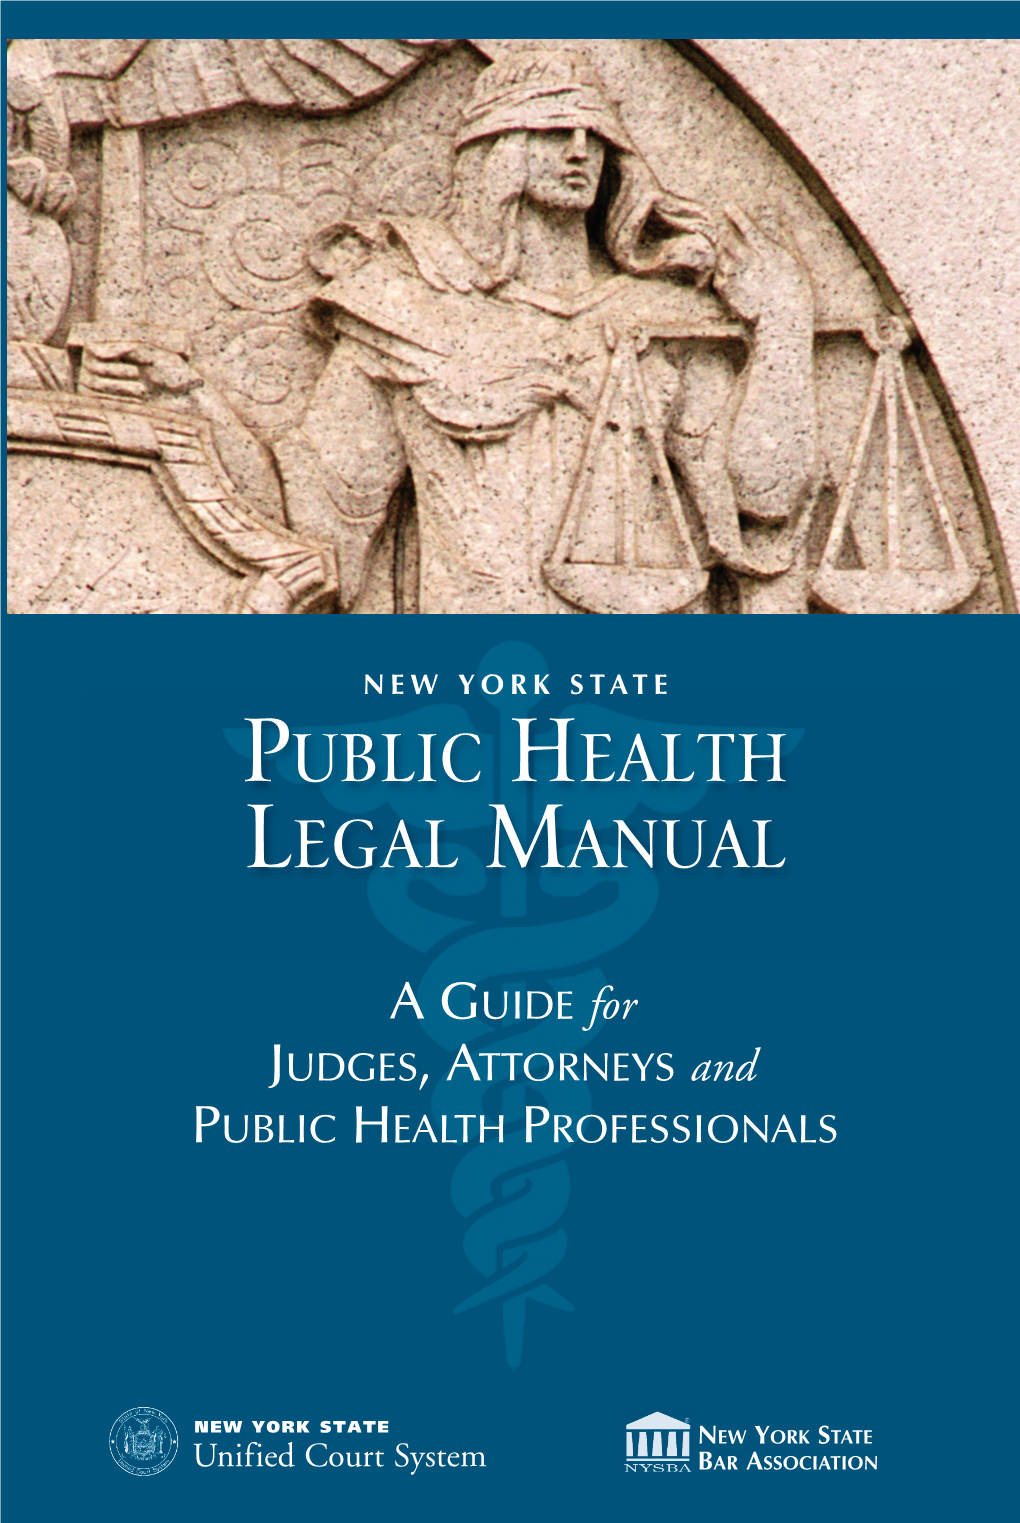 New York State Public Health Legal Manual